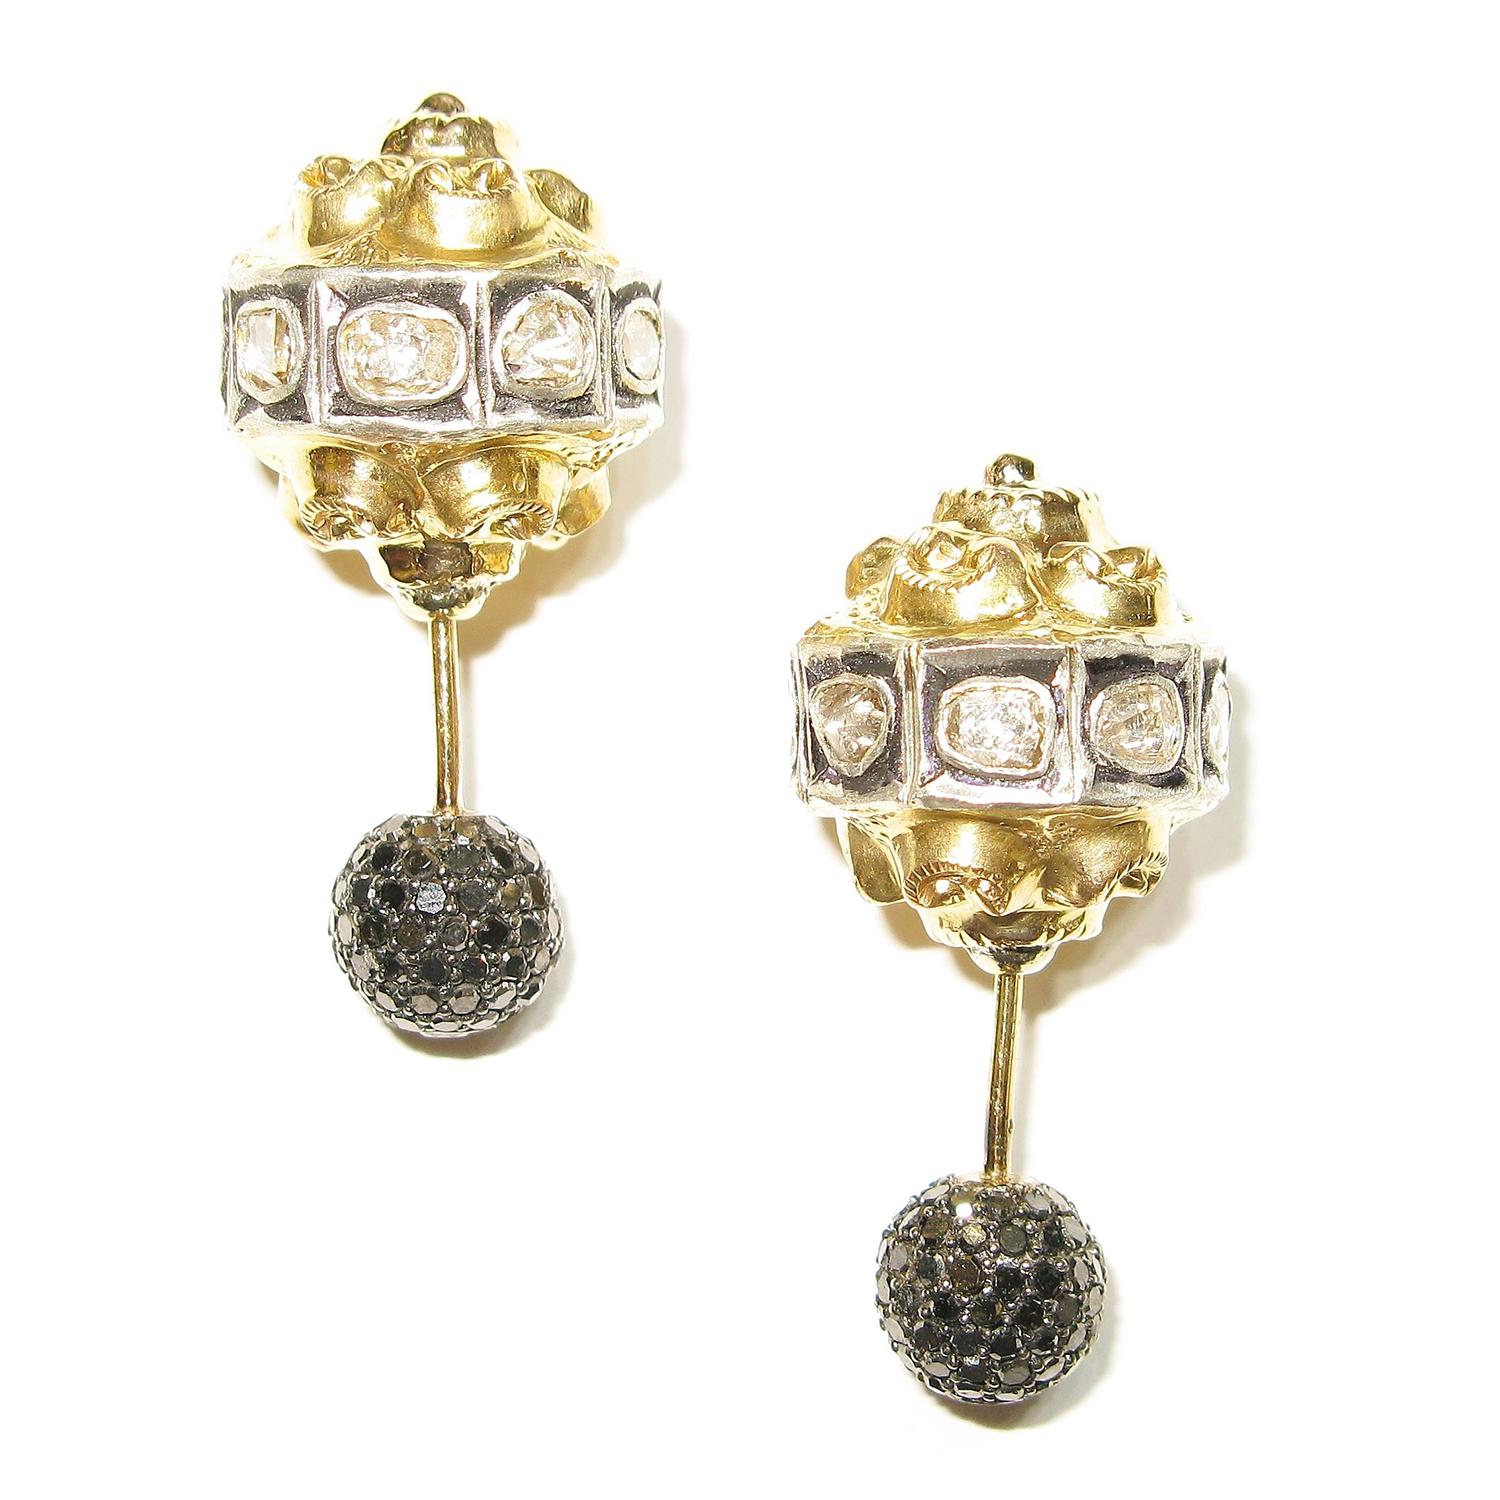 Antique Looking Double Sided Earrings With Diamonds Made In 14k Gold & Silver